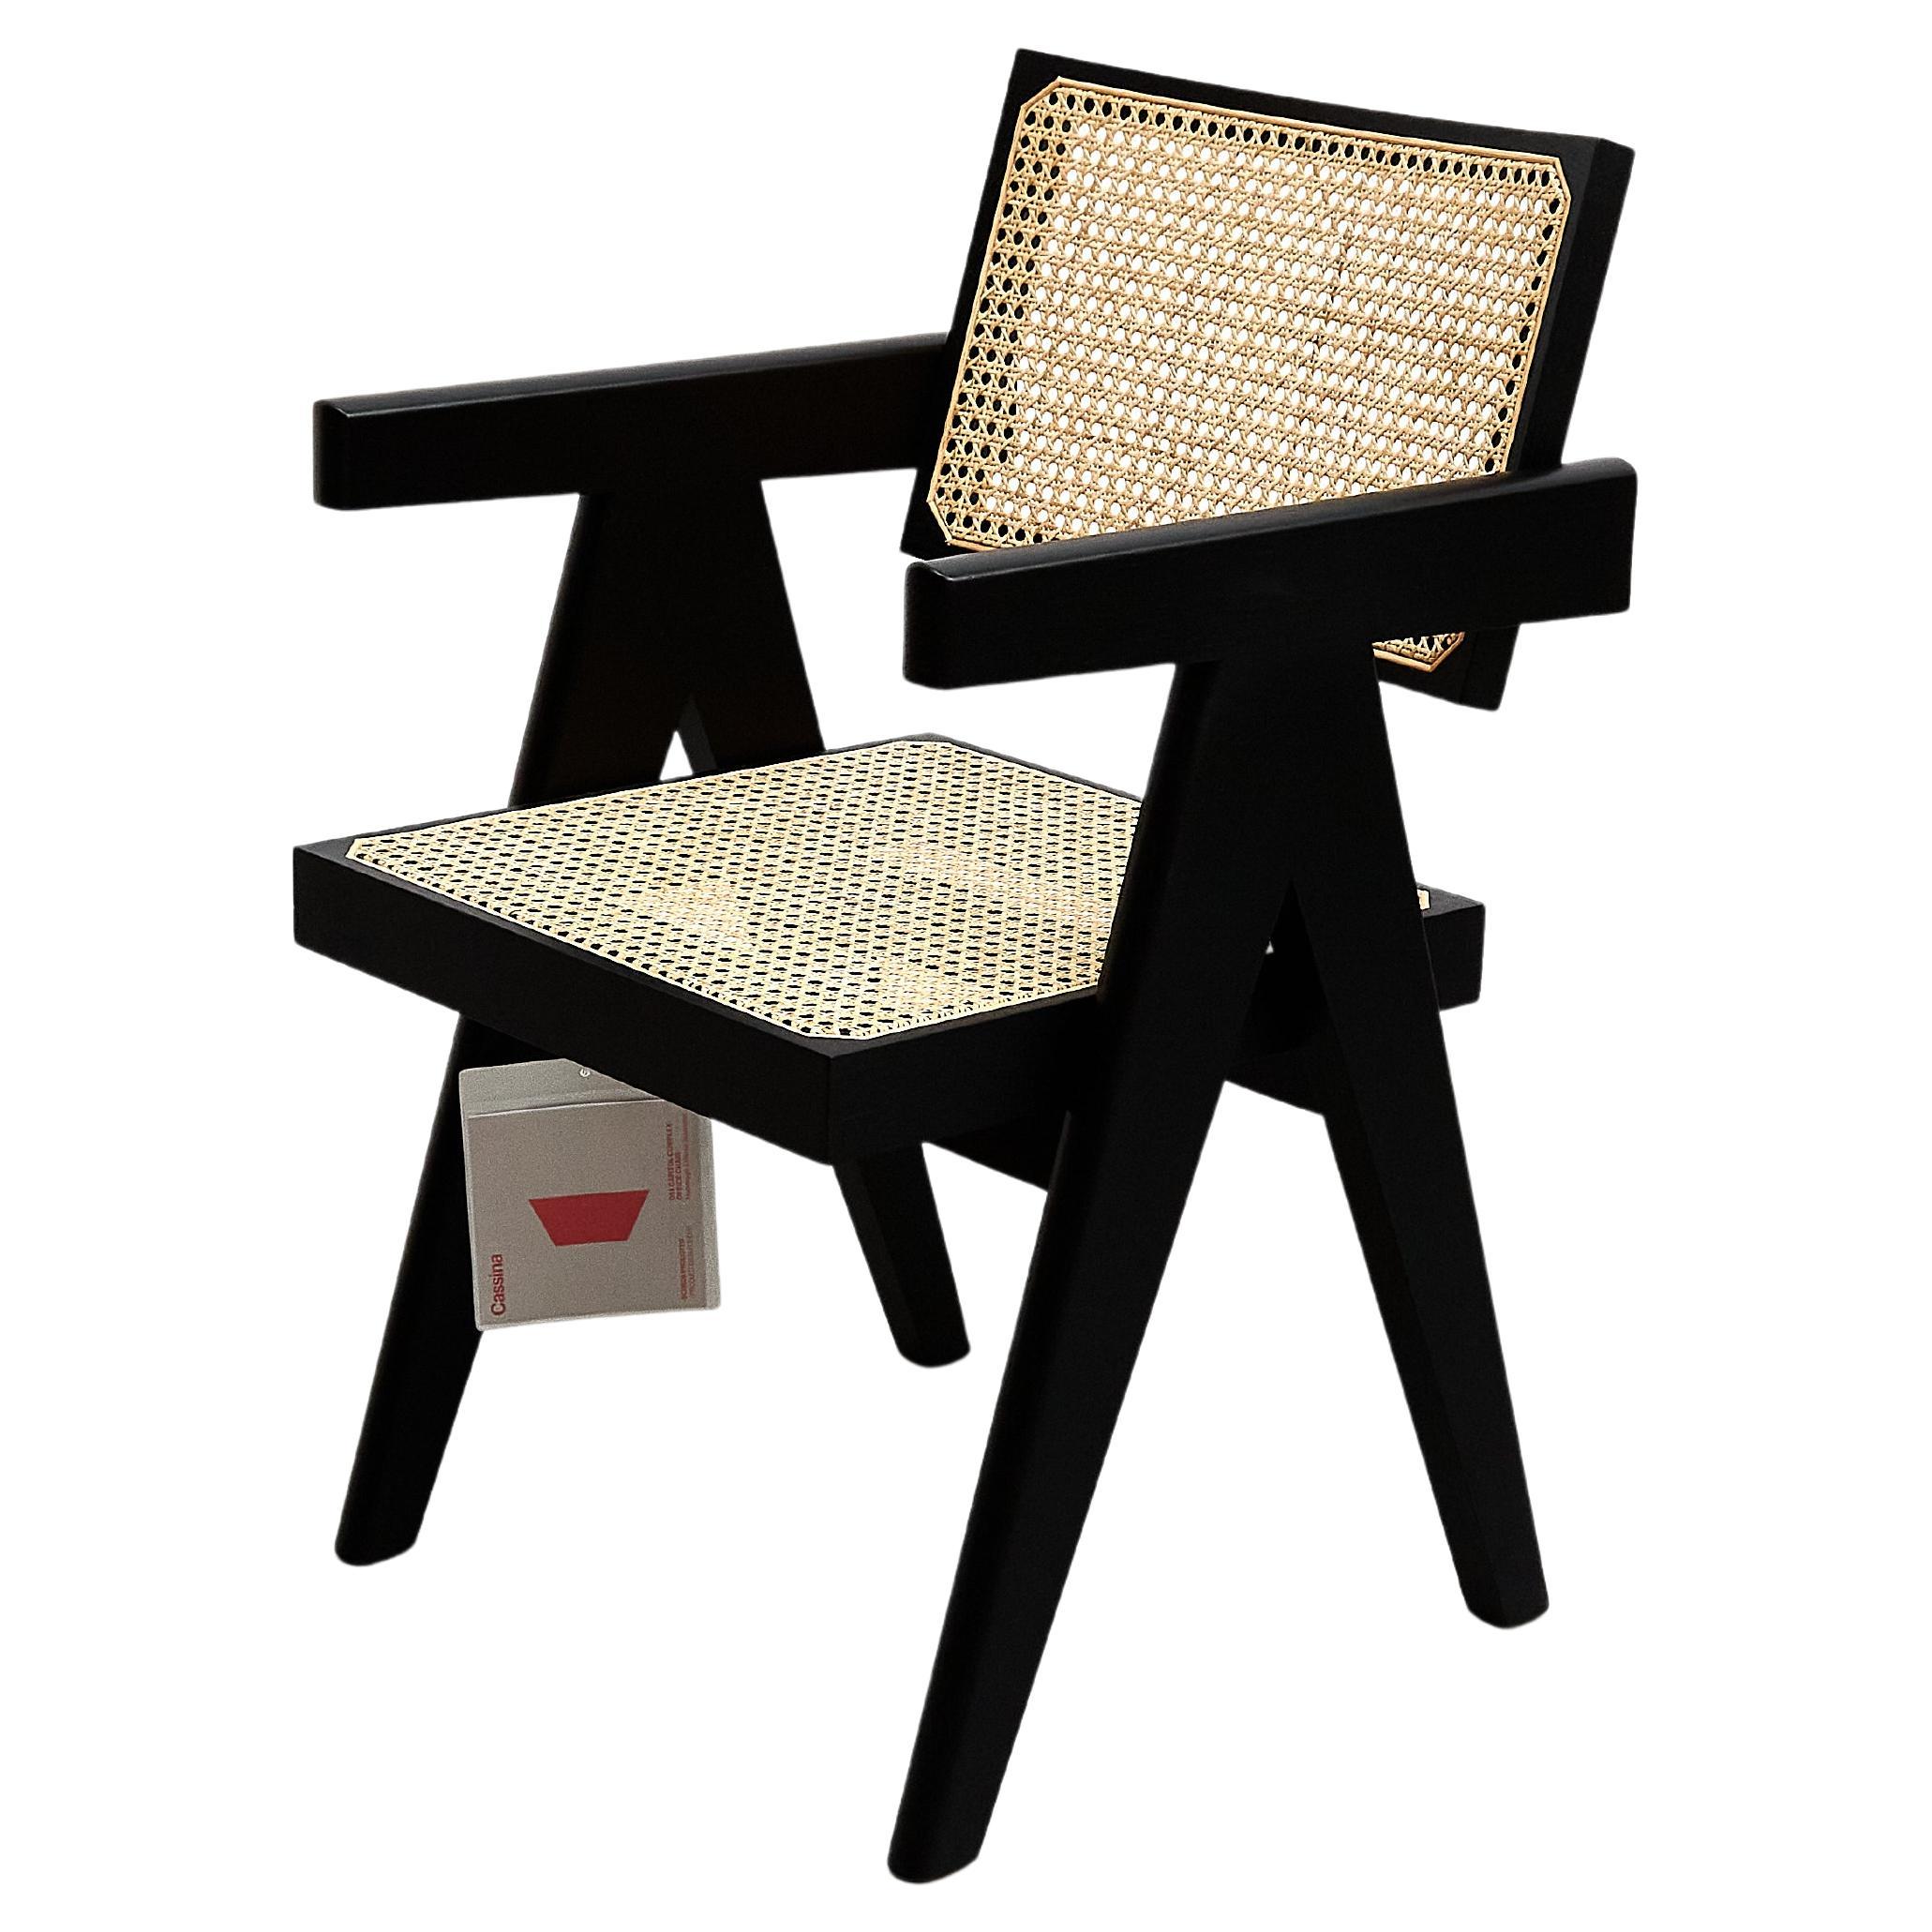 Chair designed by Pierre Jeanneret circa 1950 , relaunched in 2019.

Ready to ship.

Manufactured by Cassina in Italy.

Materials:
Wood, backrest and seat in Indian cane, upholstered cushion

Dimensions:
D 58 cm X W 51 cm X H 81 cm (SH 43